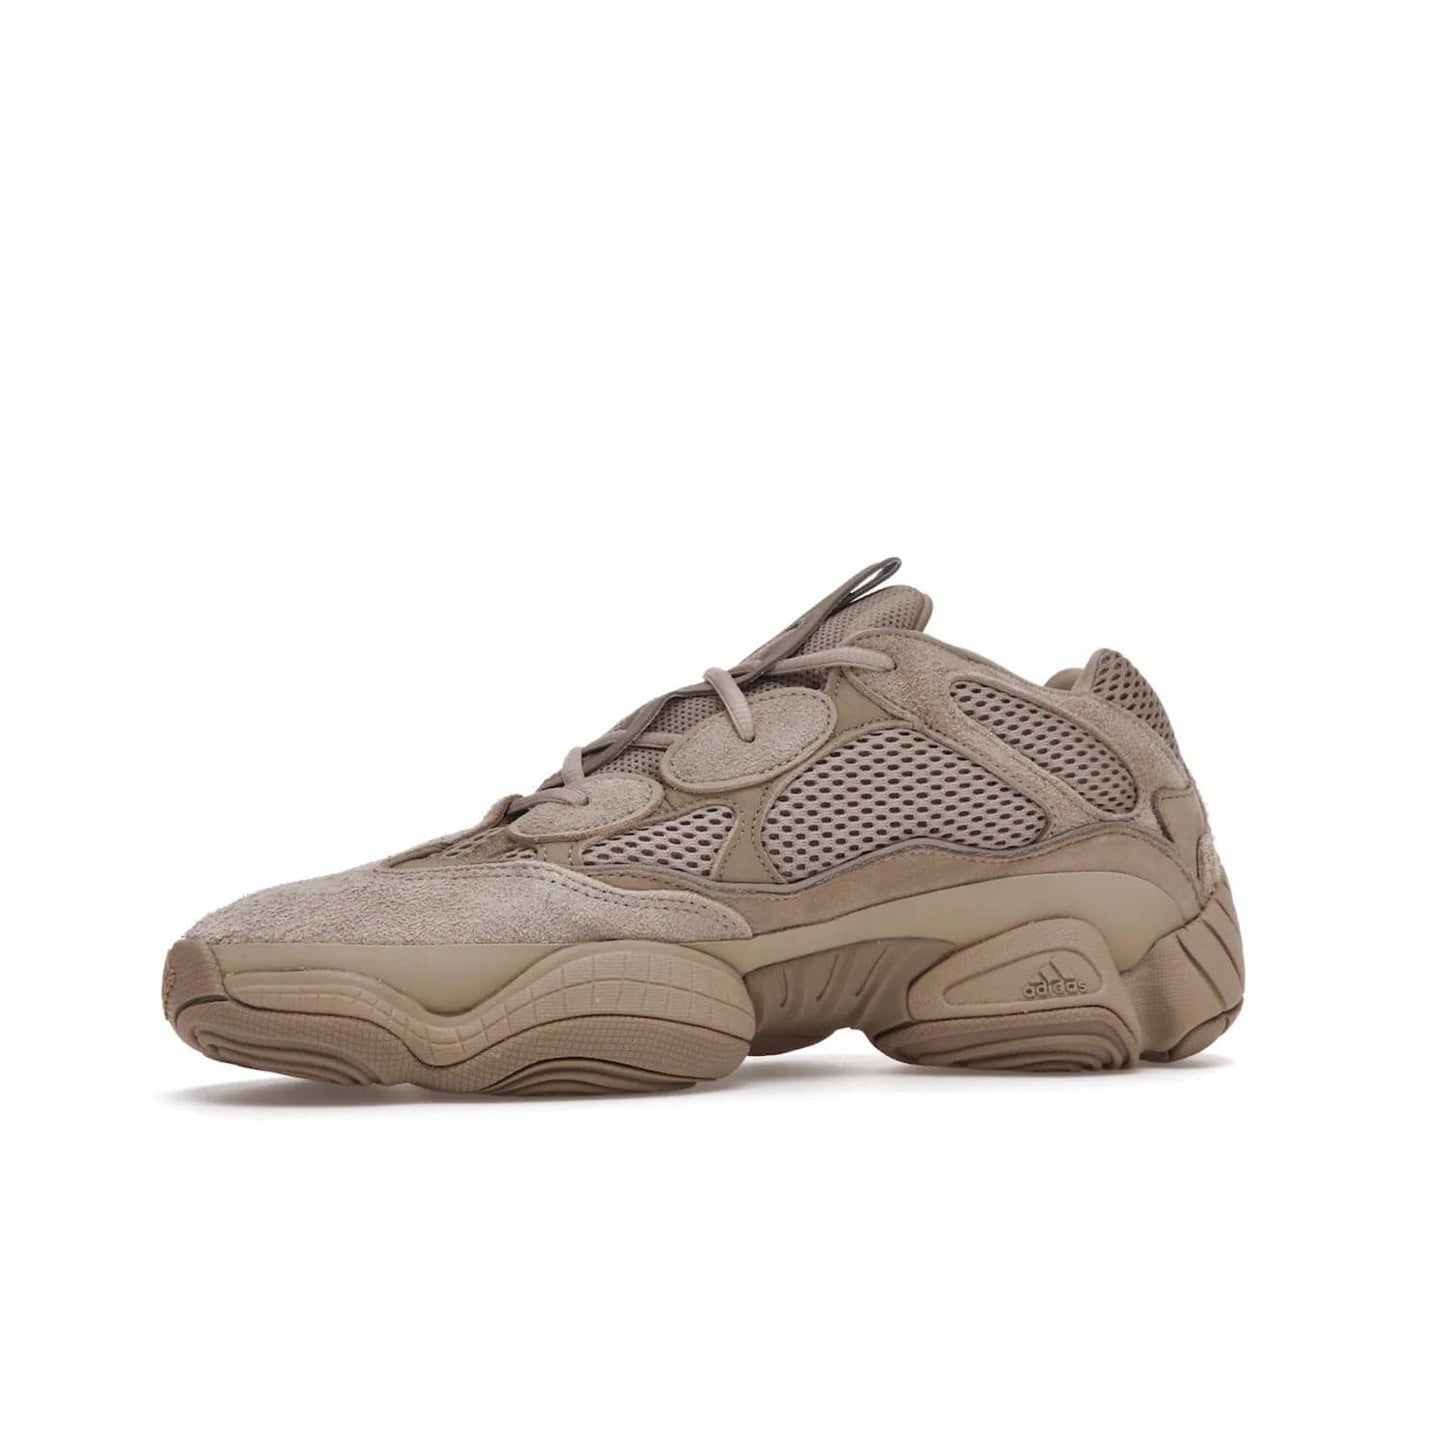 adidas Yeezy 500 Taupe Light - Image 17 - Only at www.BallersClubKickz.com - The adidas Yeezy 500 Taupe Light combines mesh, leather, and suede, with a durable adiPRENE sole for an eye-catching accessory. Reflective piping adds the perfect finishing touches to this unique silhouette. Ideal for any wardrobe, releasing in June 2021.